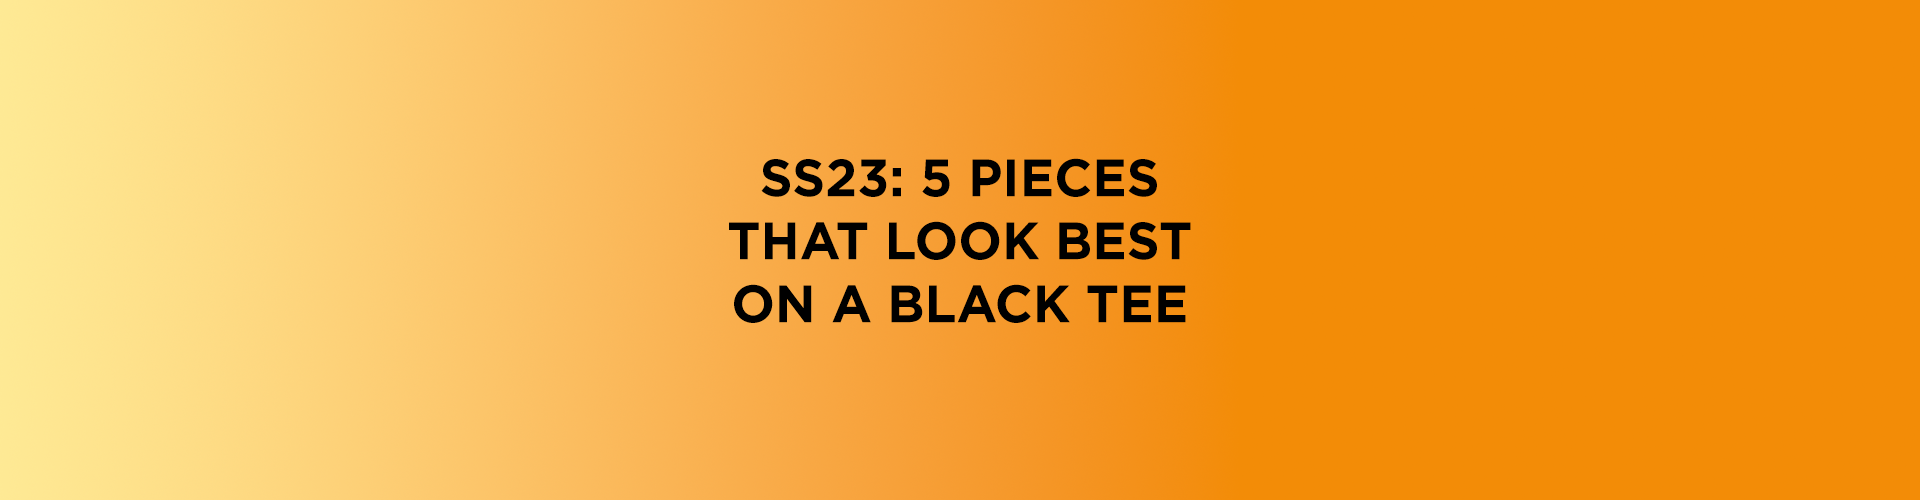 SS23: 5 PIECES THAT LOOK BEST ON A BLACK TEE